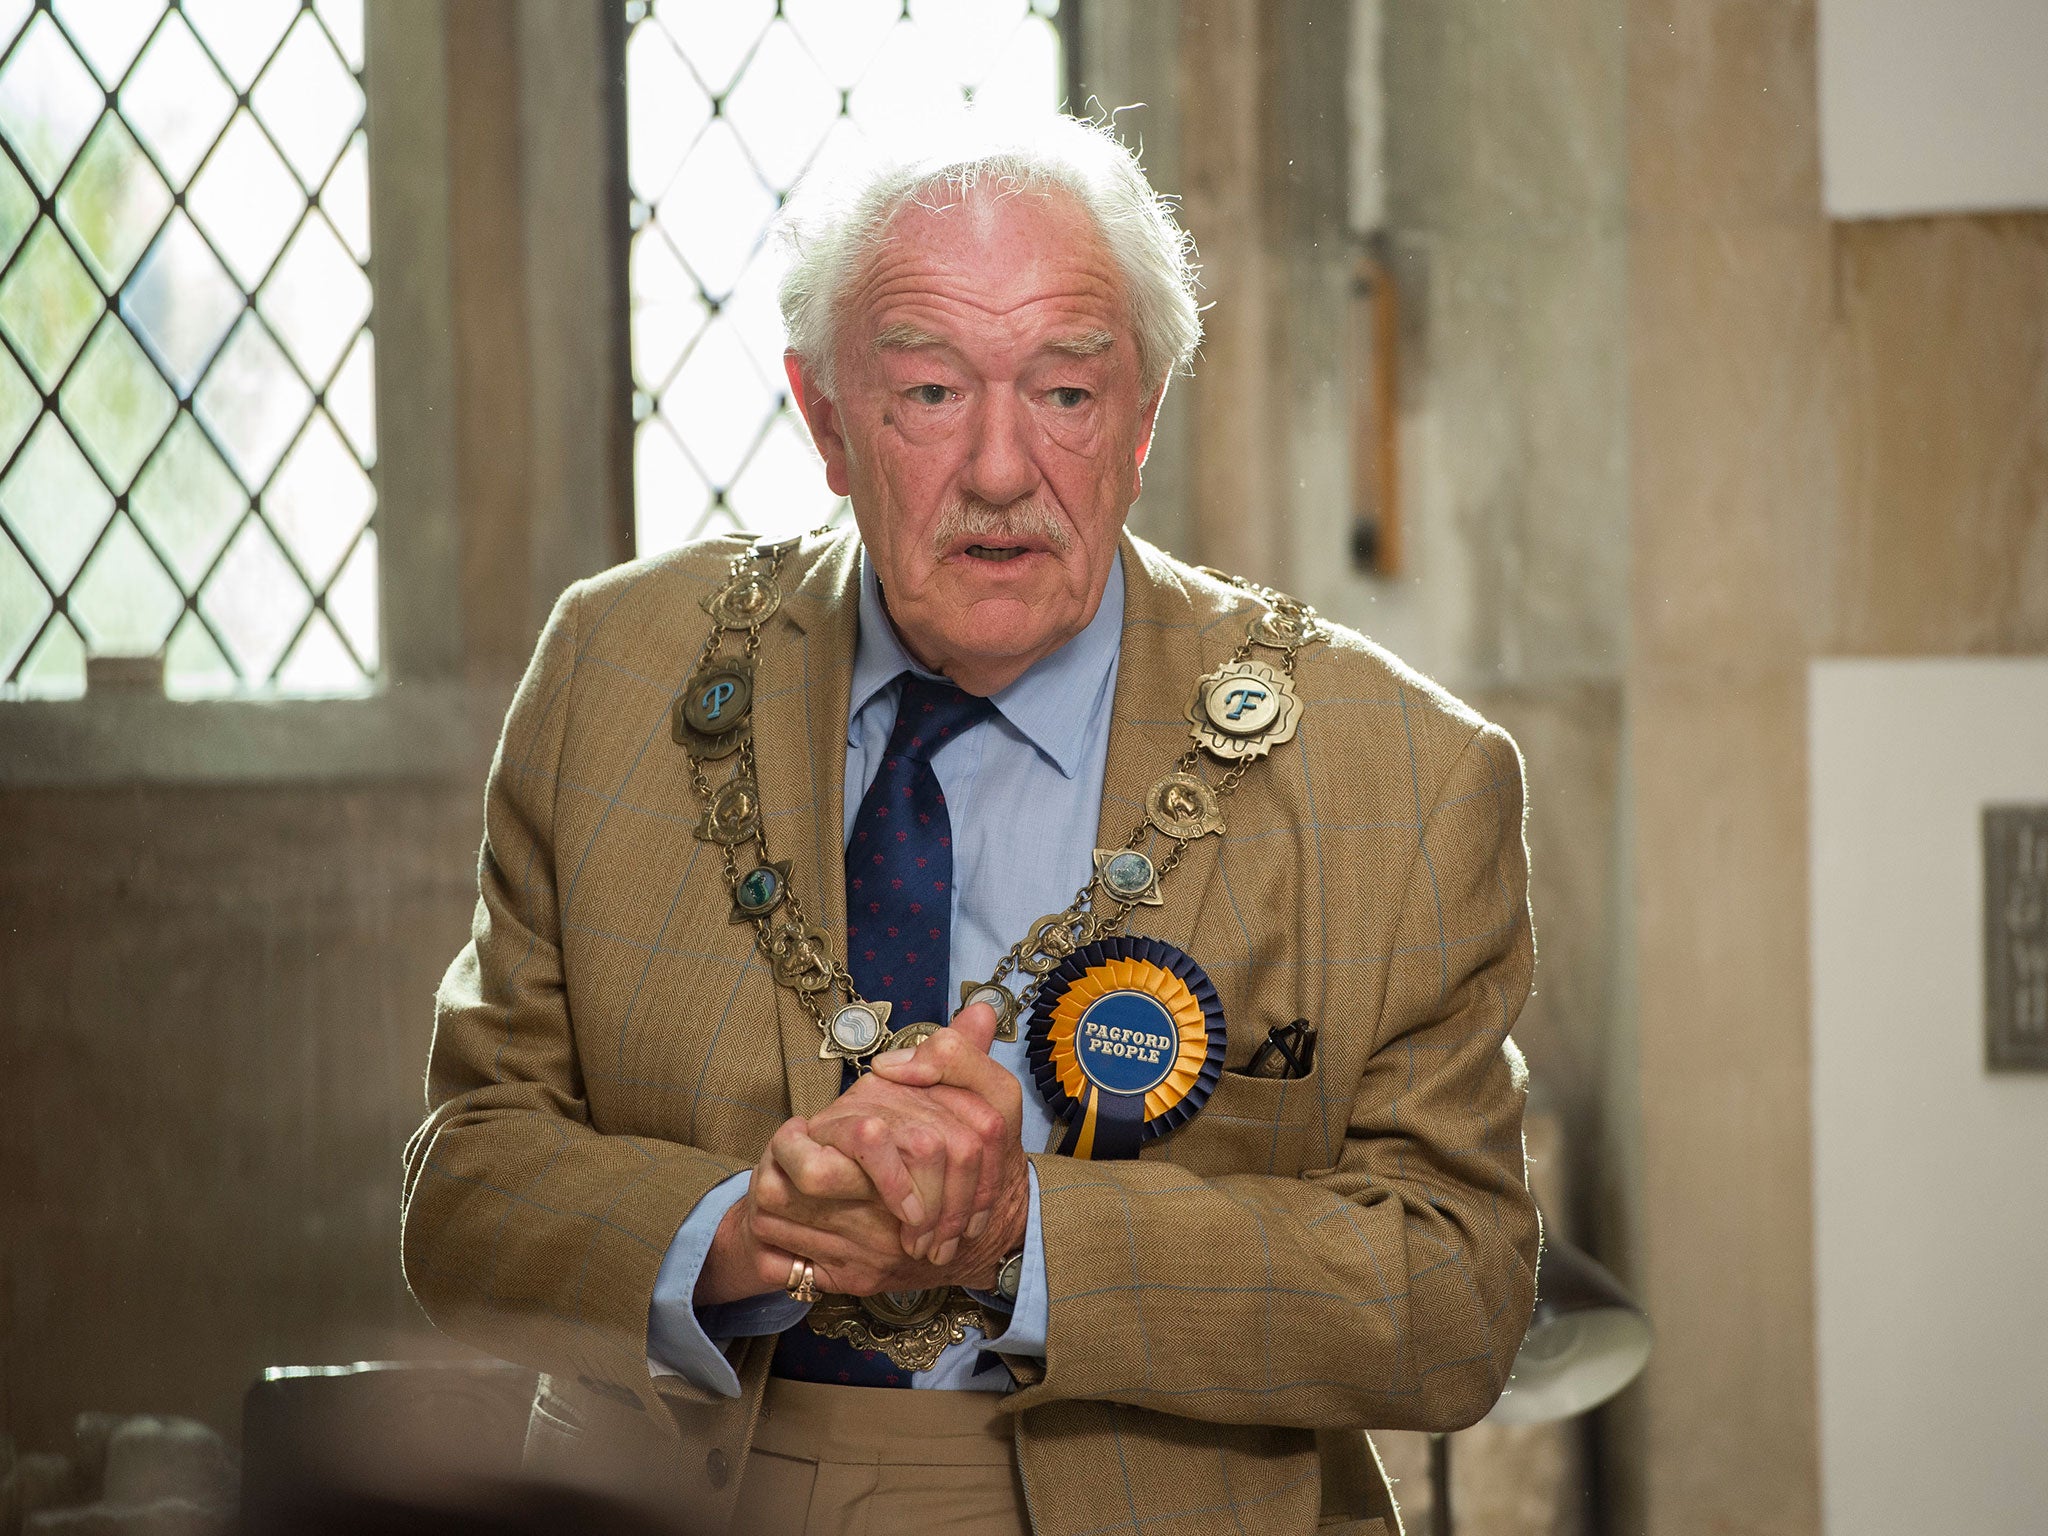 Howard Mollison, as played by Michael Gambon